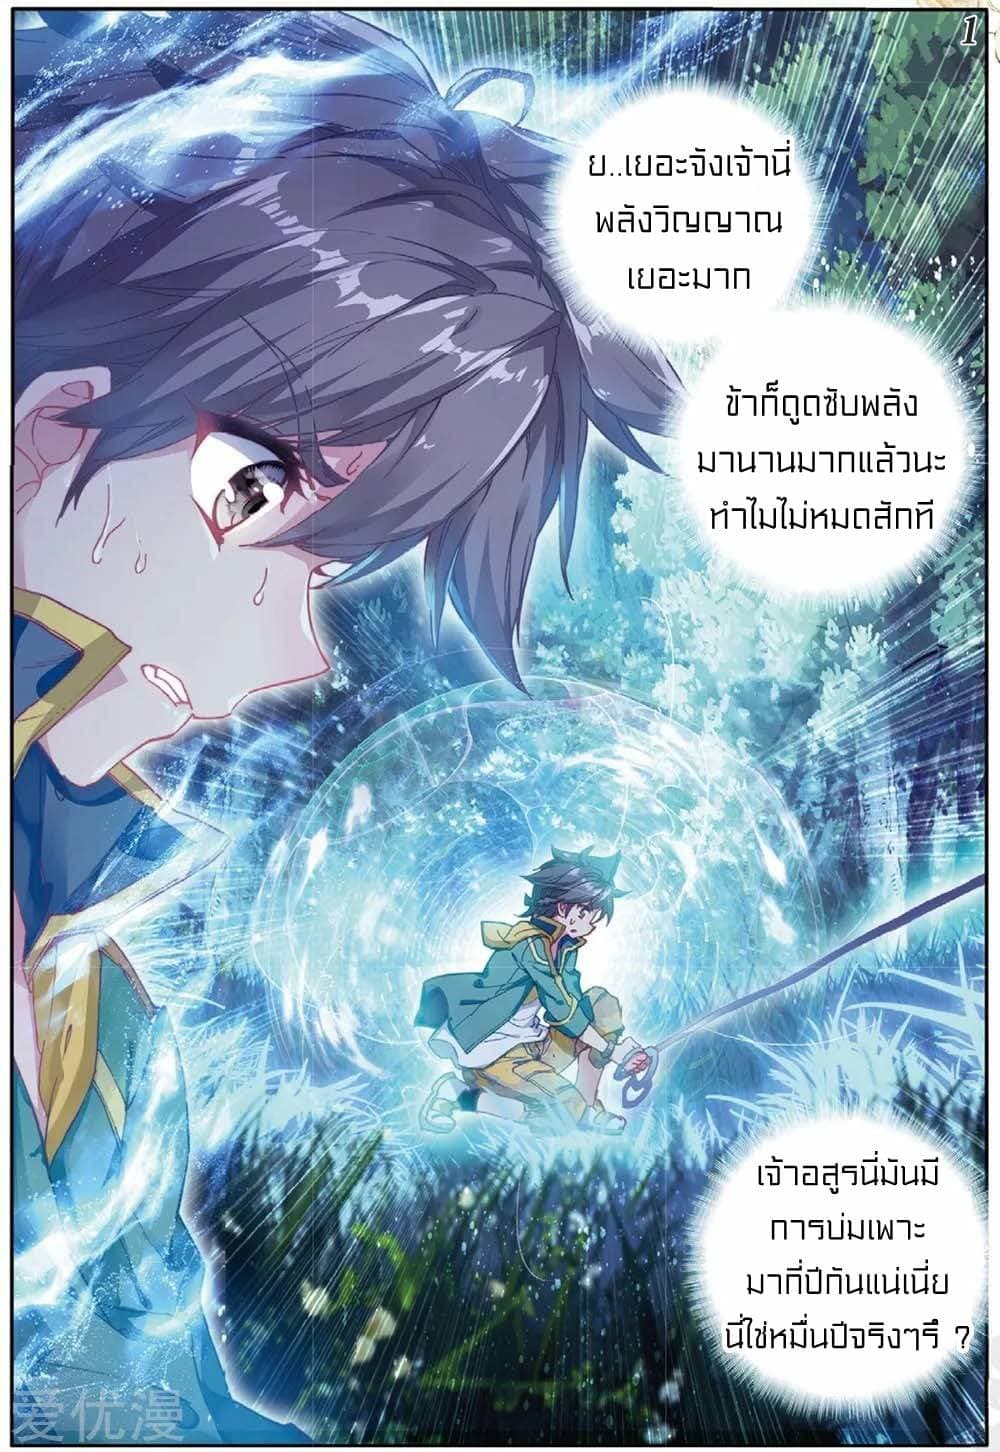 Douluo Dalu 3: The Legend of the Dragon King 88-ผลักดันขีคจำกัด